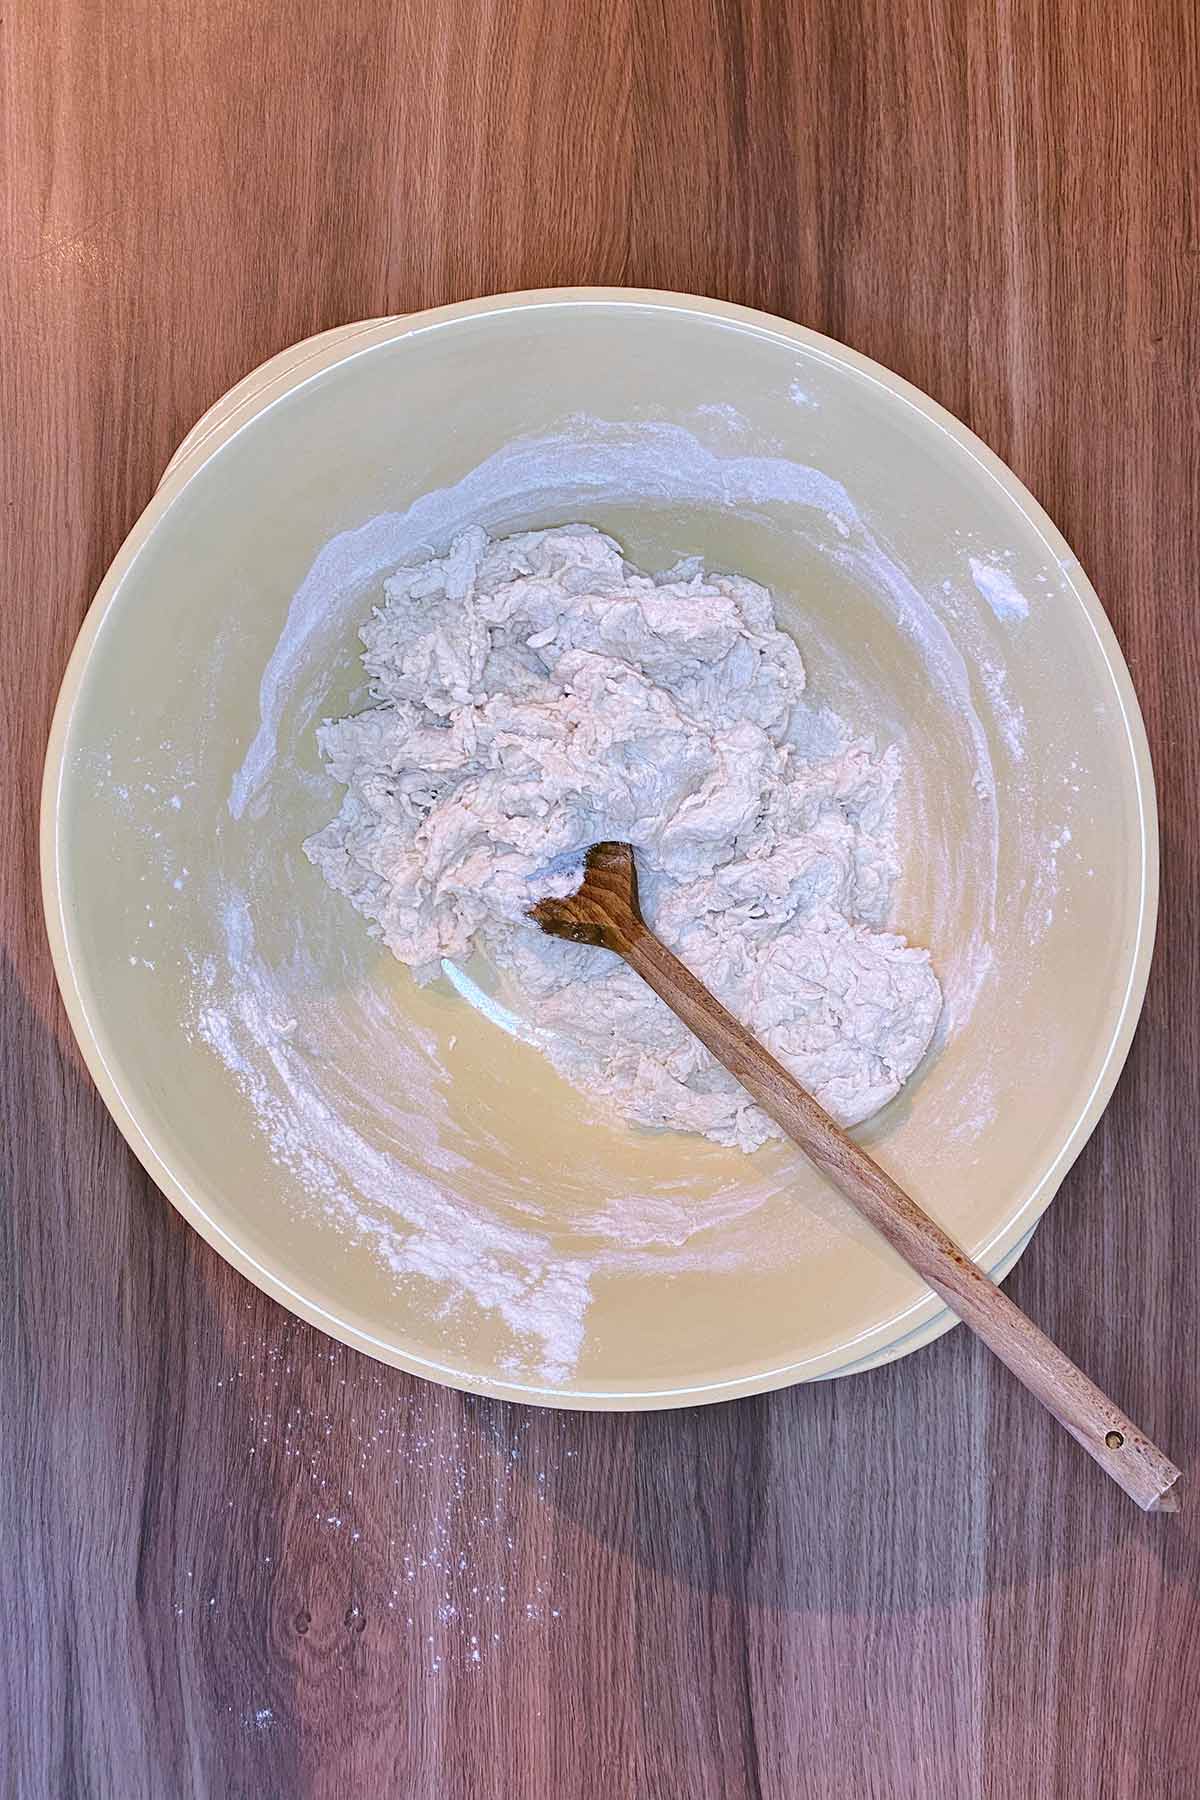 A sticky bread dough in a bowl with a wooden spoon.